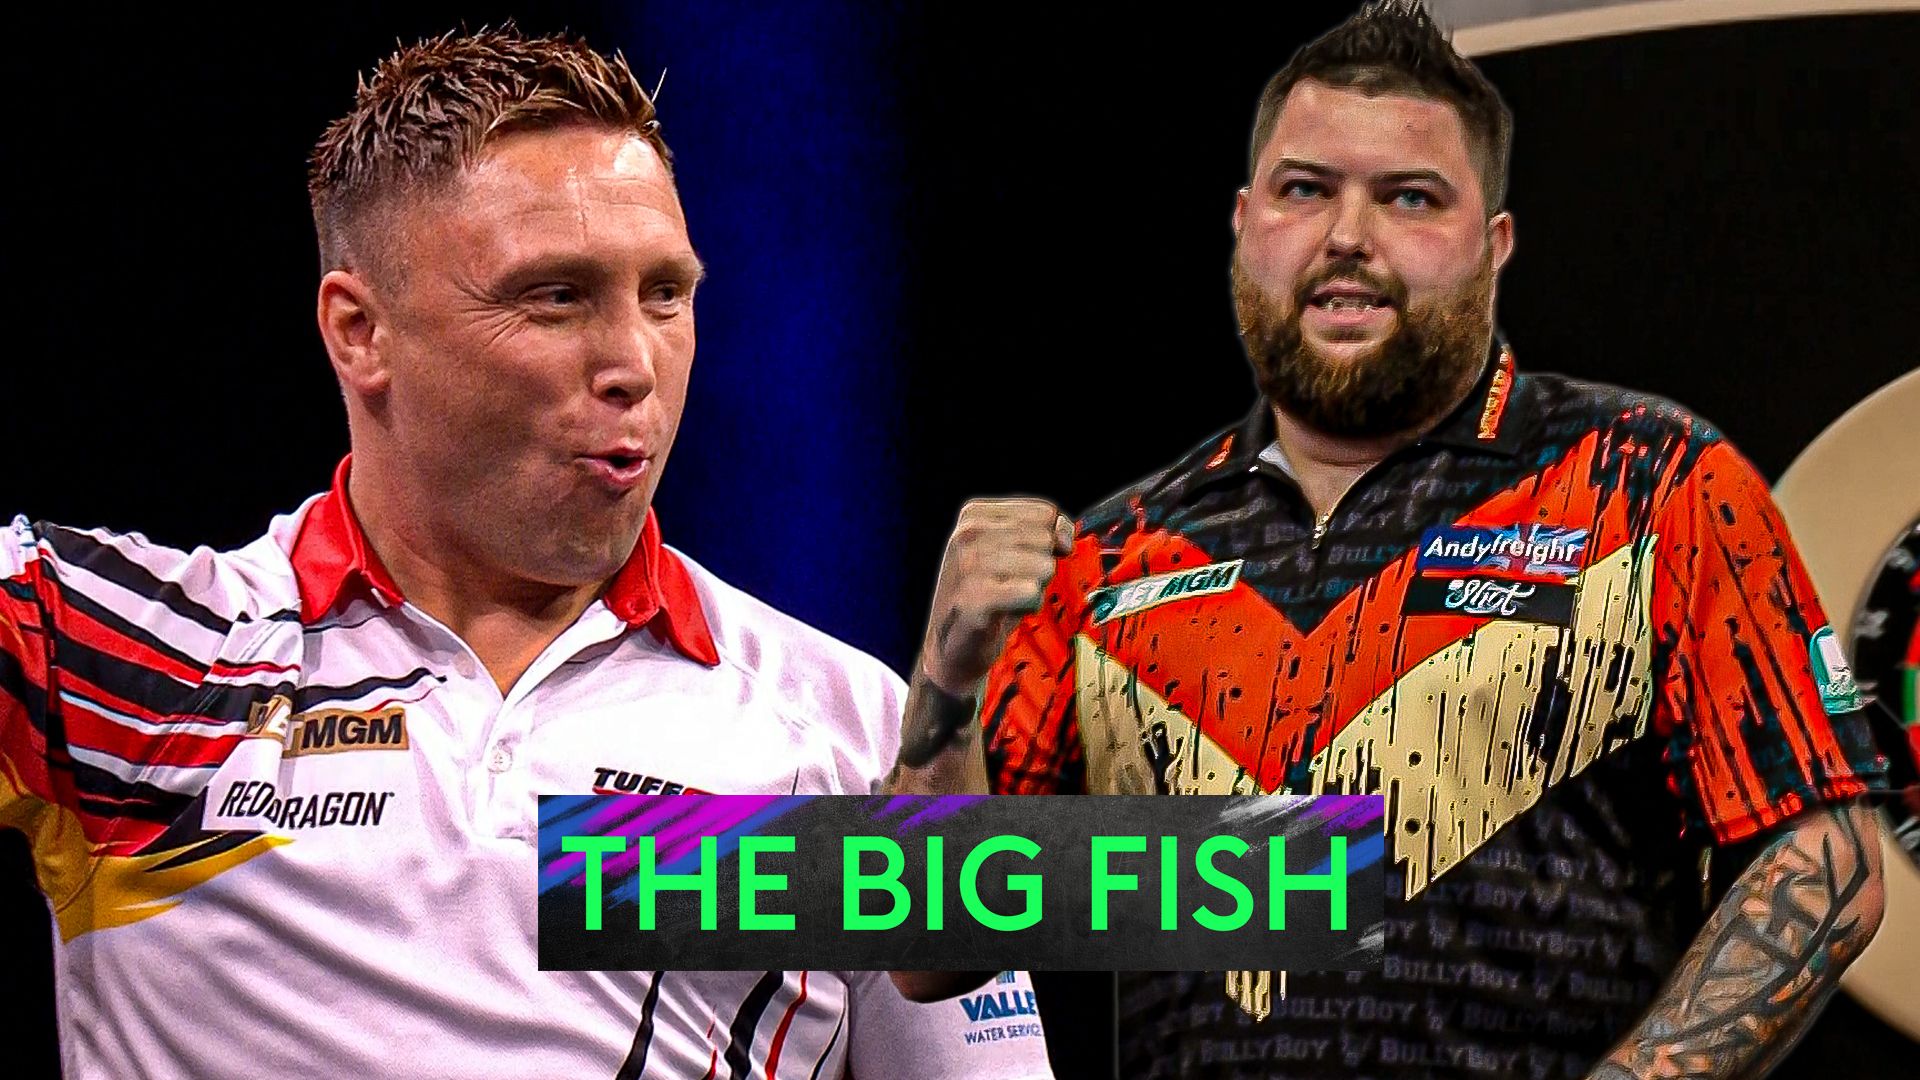 Incredible scenes as Smith and Price both reel in a Big Fish!